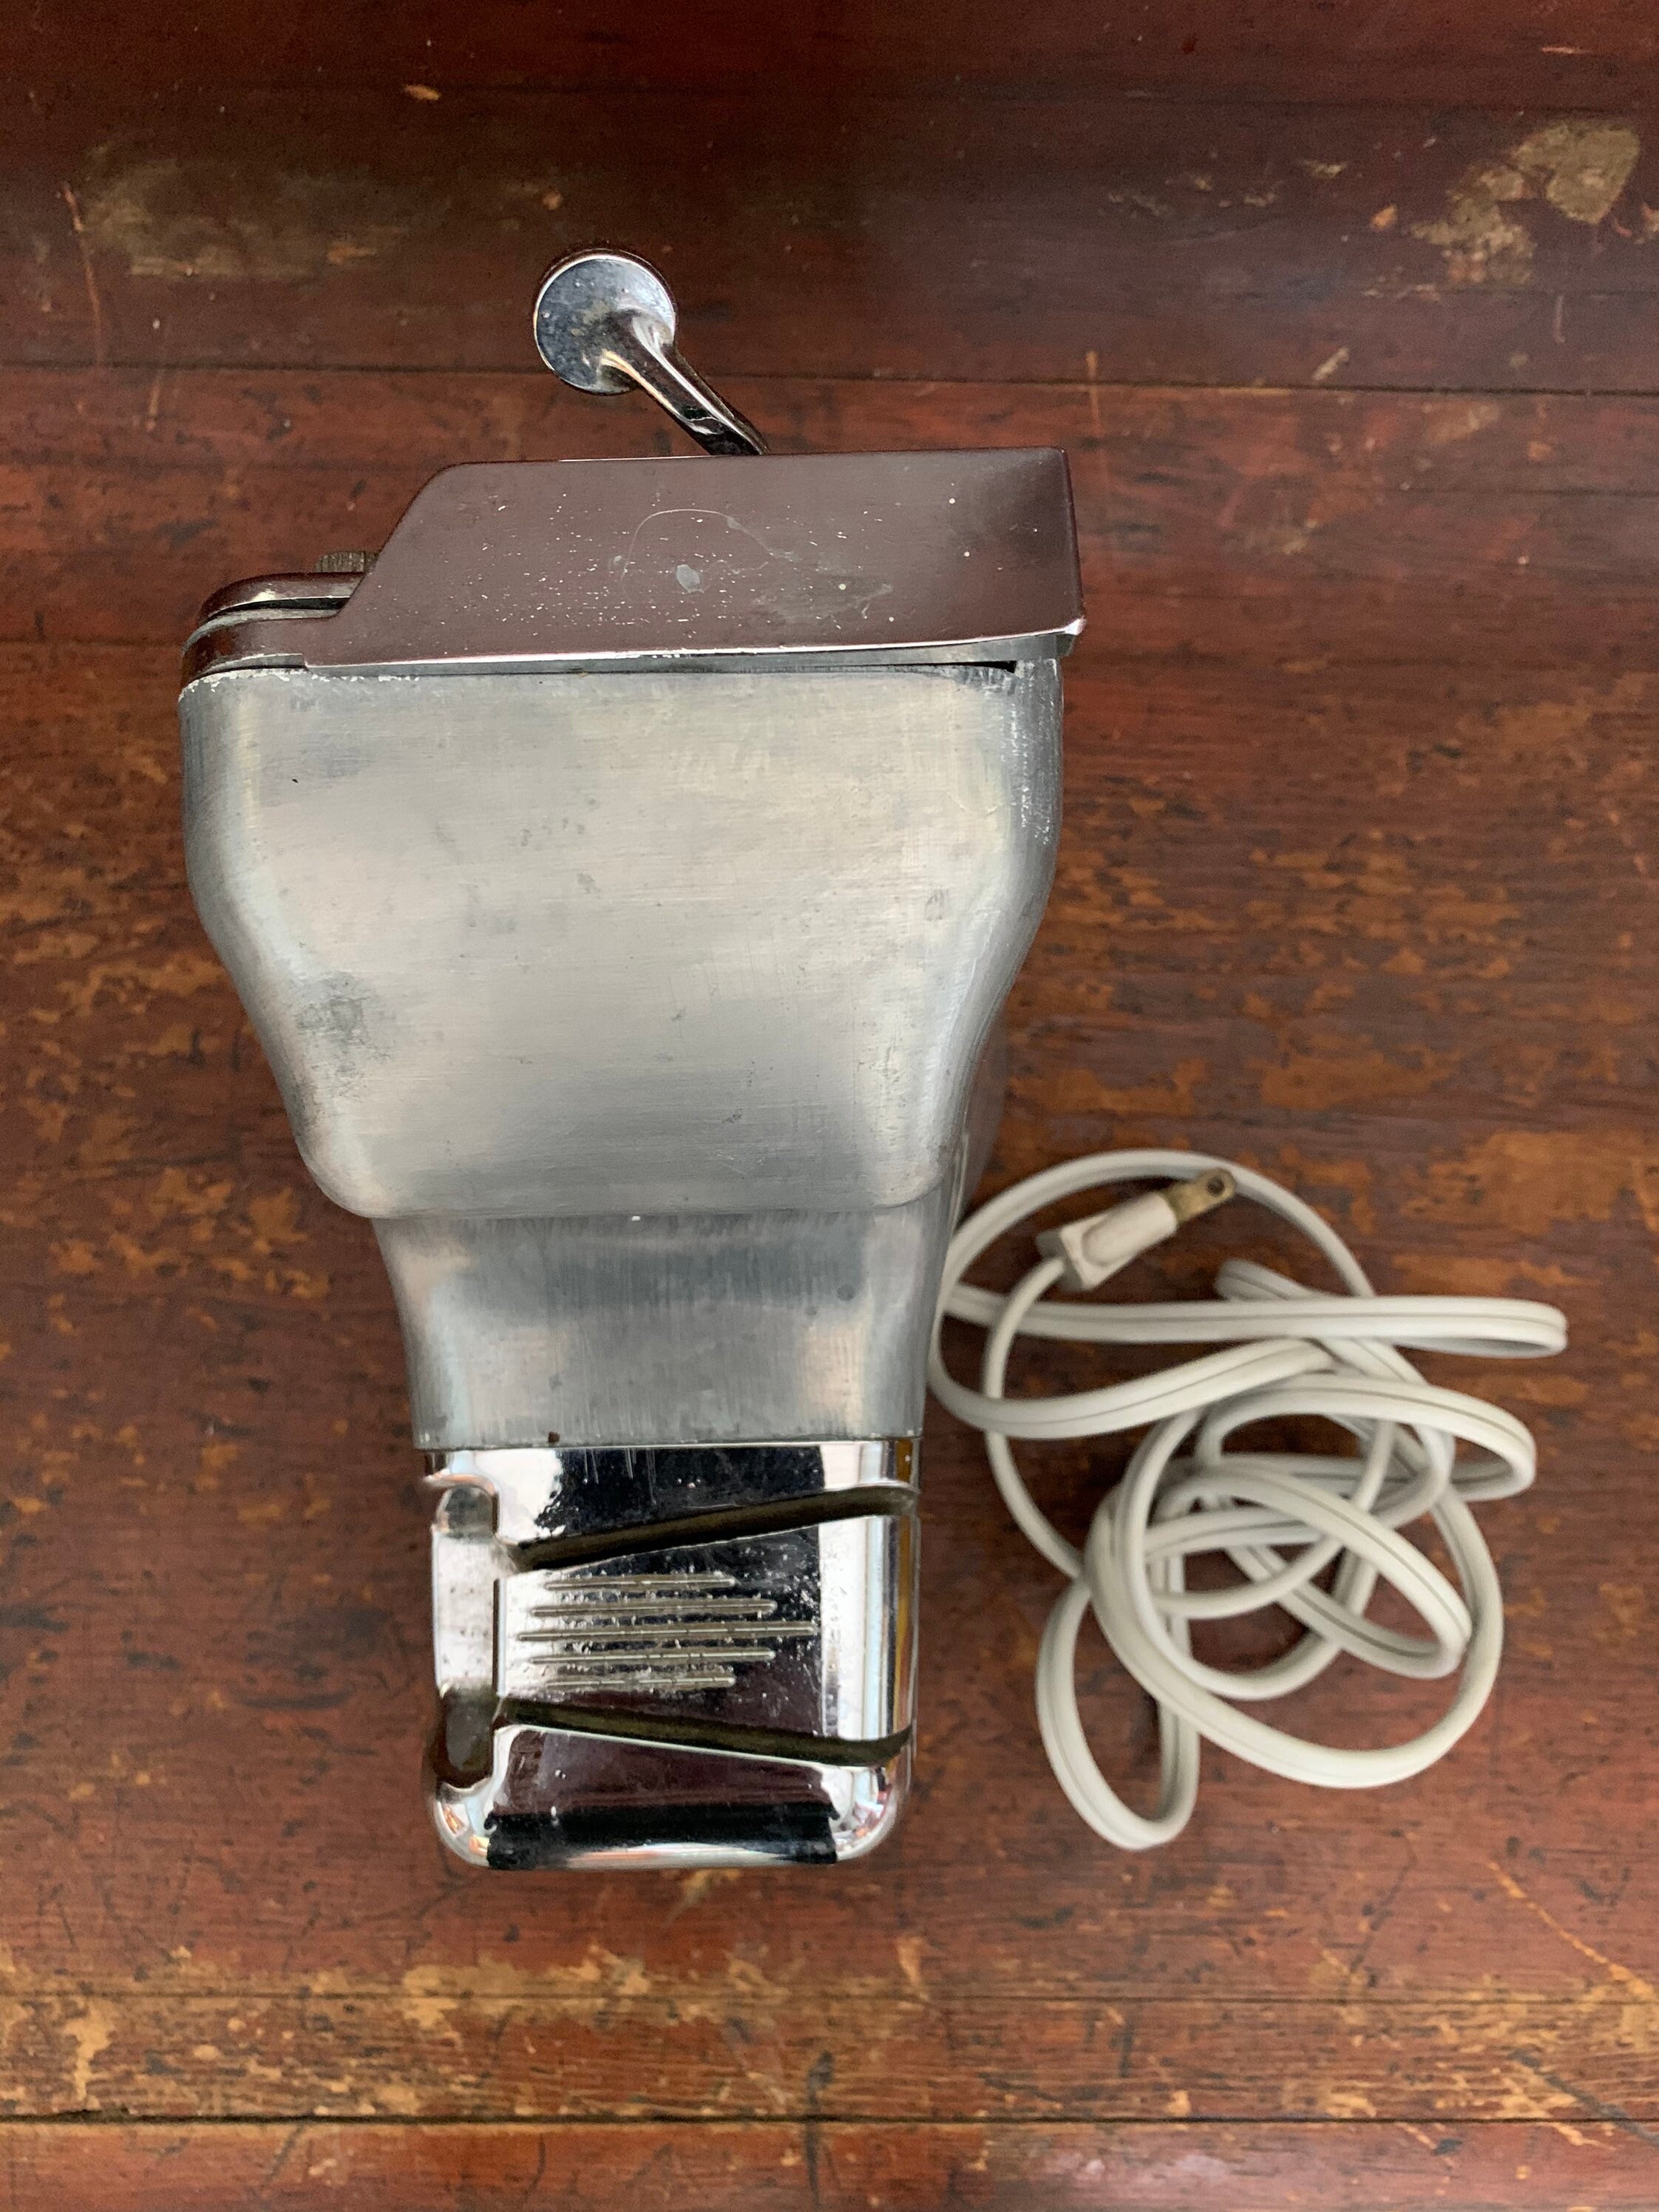 Unopened electric can opener for Sale in Bellevue, WA - OfferUp